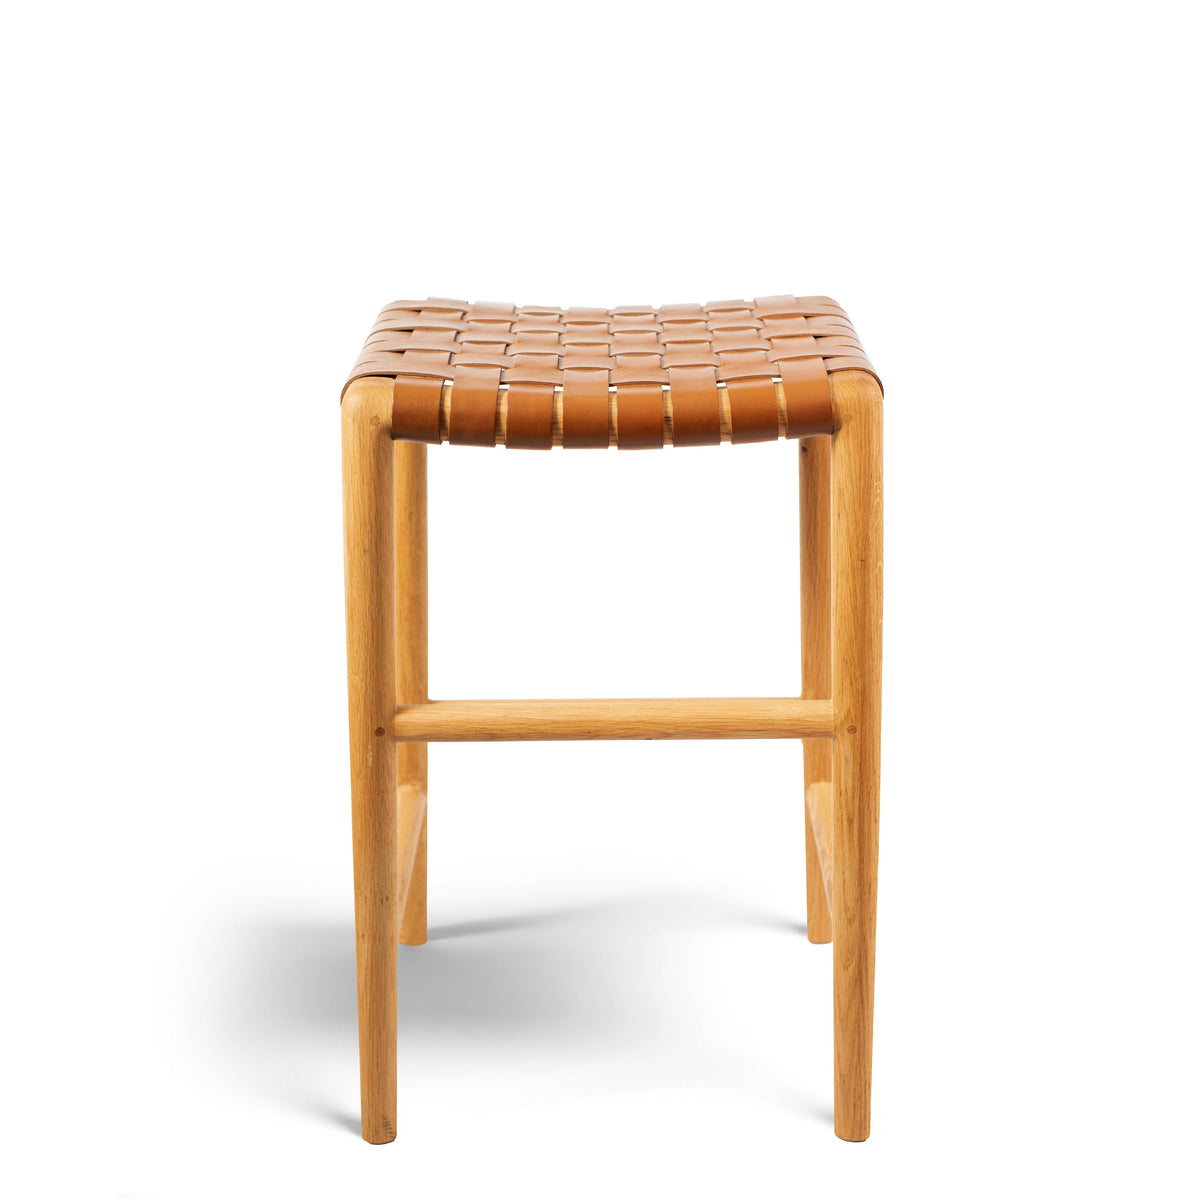 Clearance - Tanner Stool - Tan